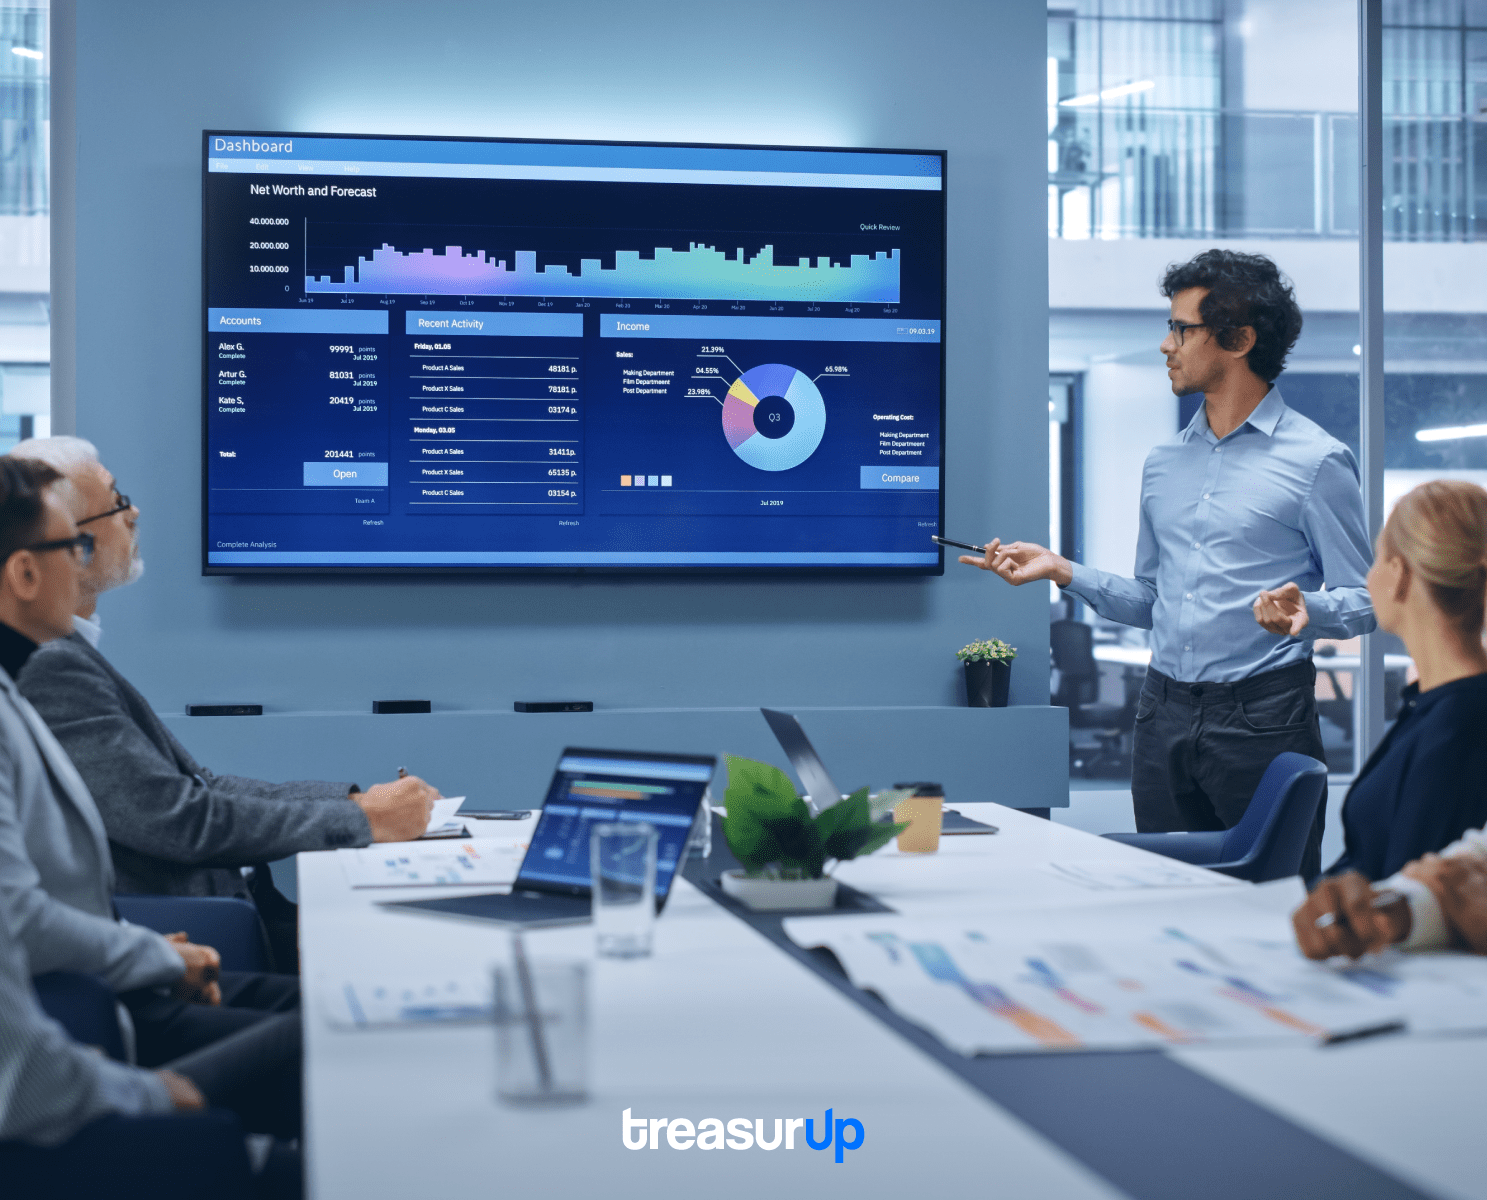 A photo representing data-driven decision-making, featured on the website to showcase TreasurUp's analytics capabilities. This image is related to the company's focus on using data insights to inform strategic decisions and optimize financial performance.